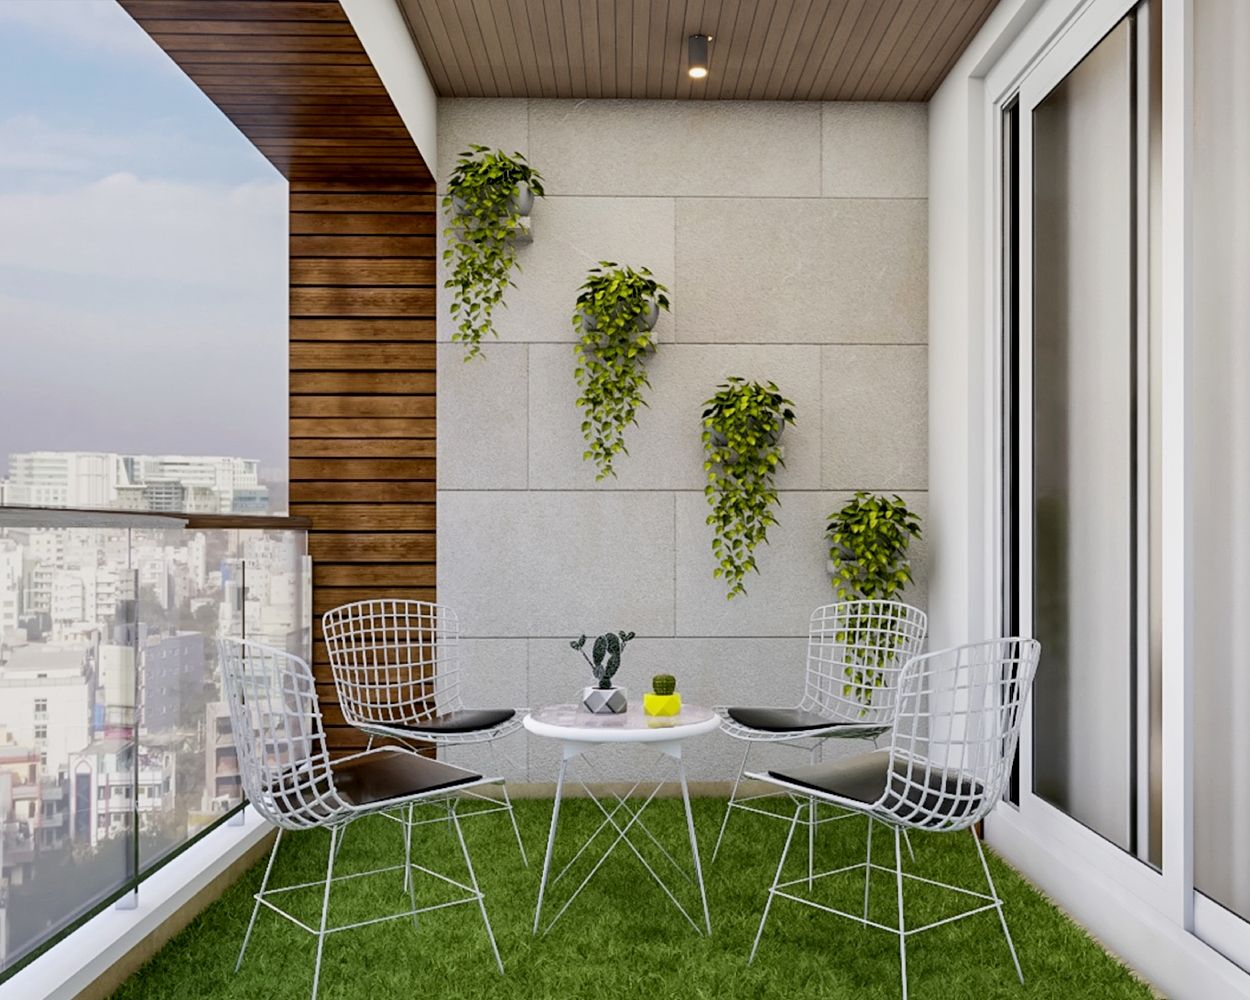 Tropical Balcony Design With Grey Textured Wall Tile